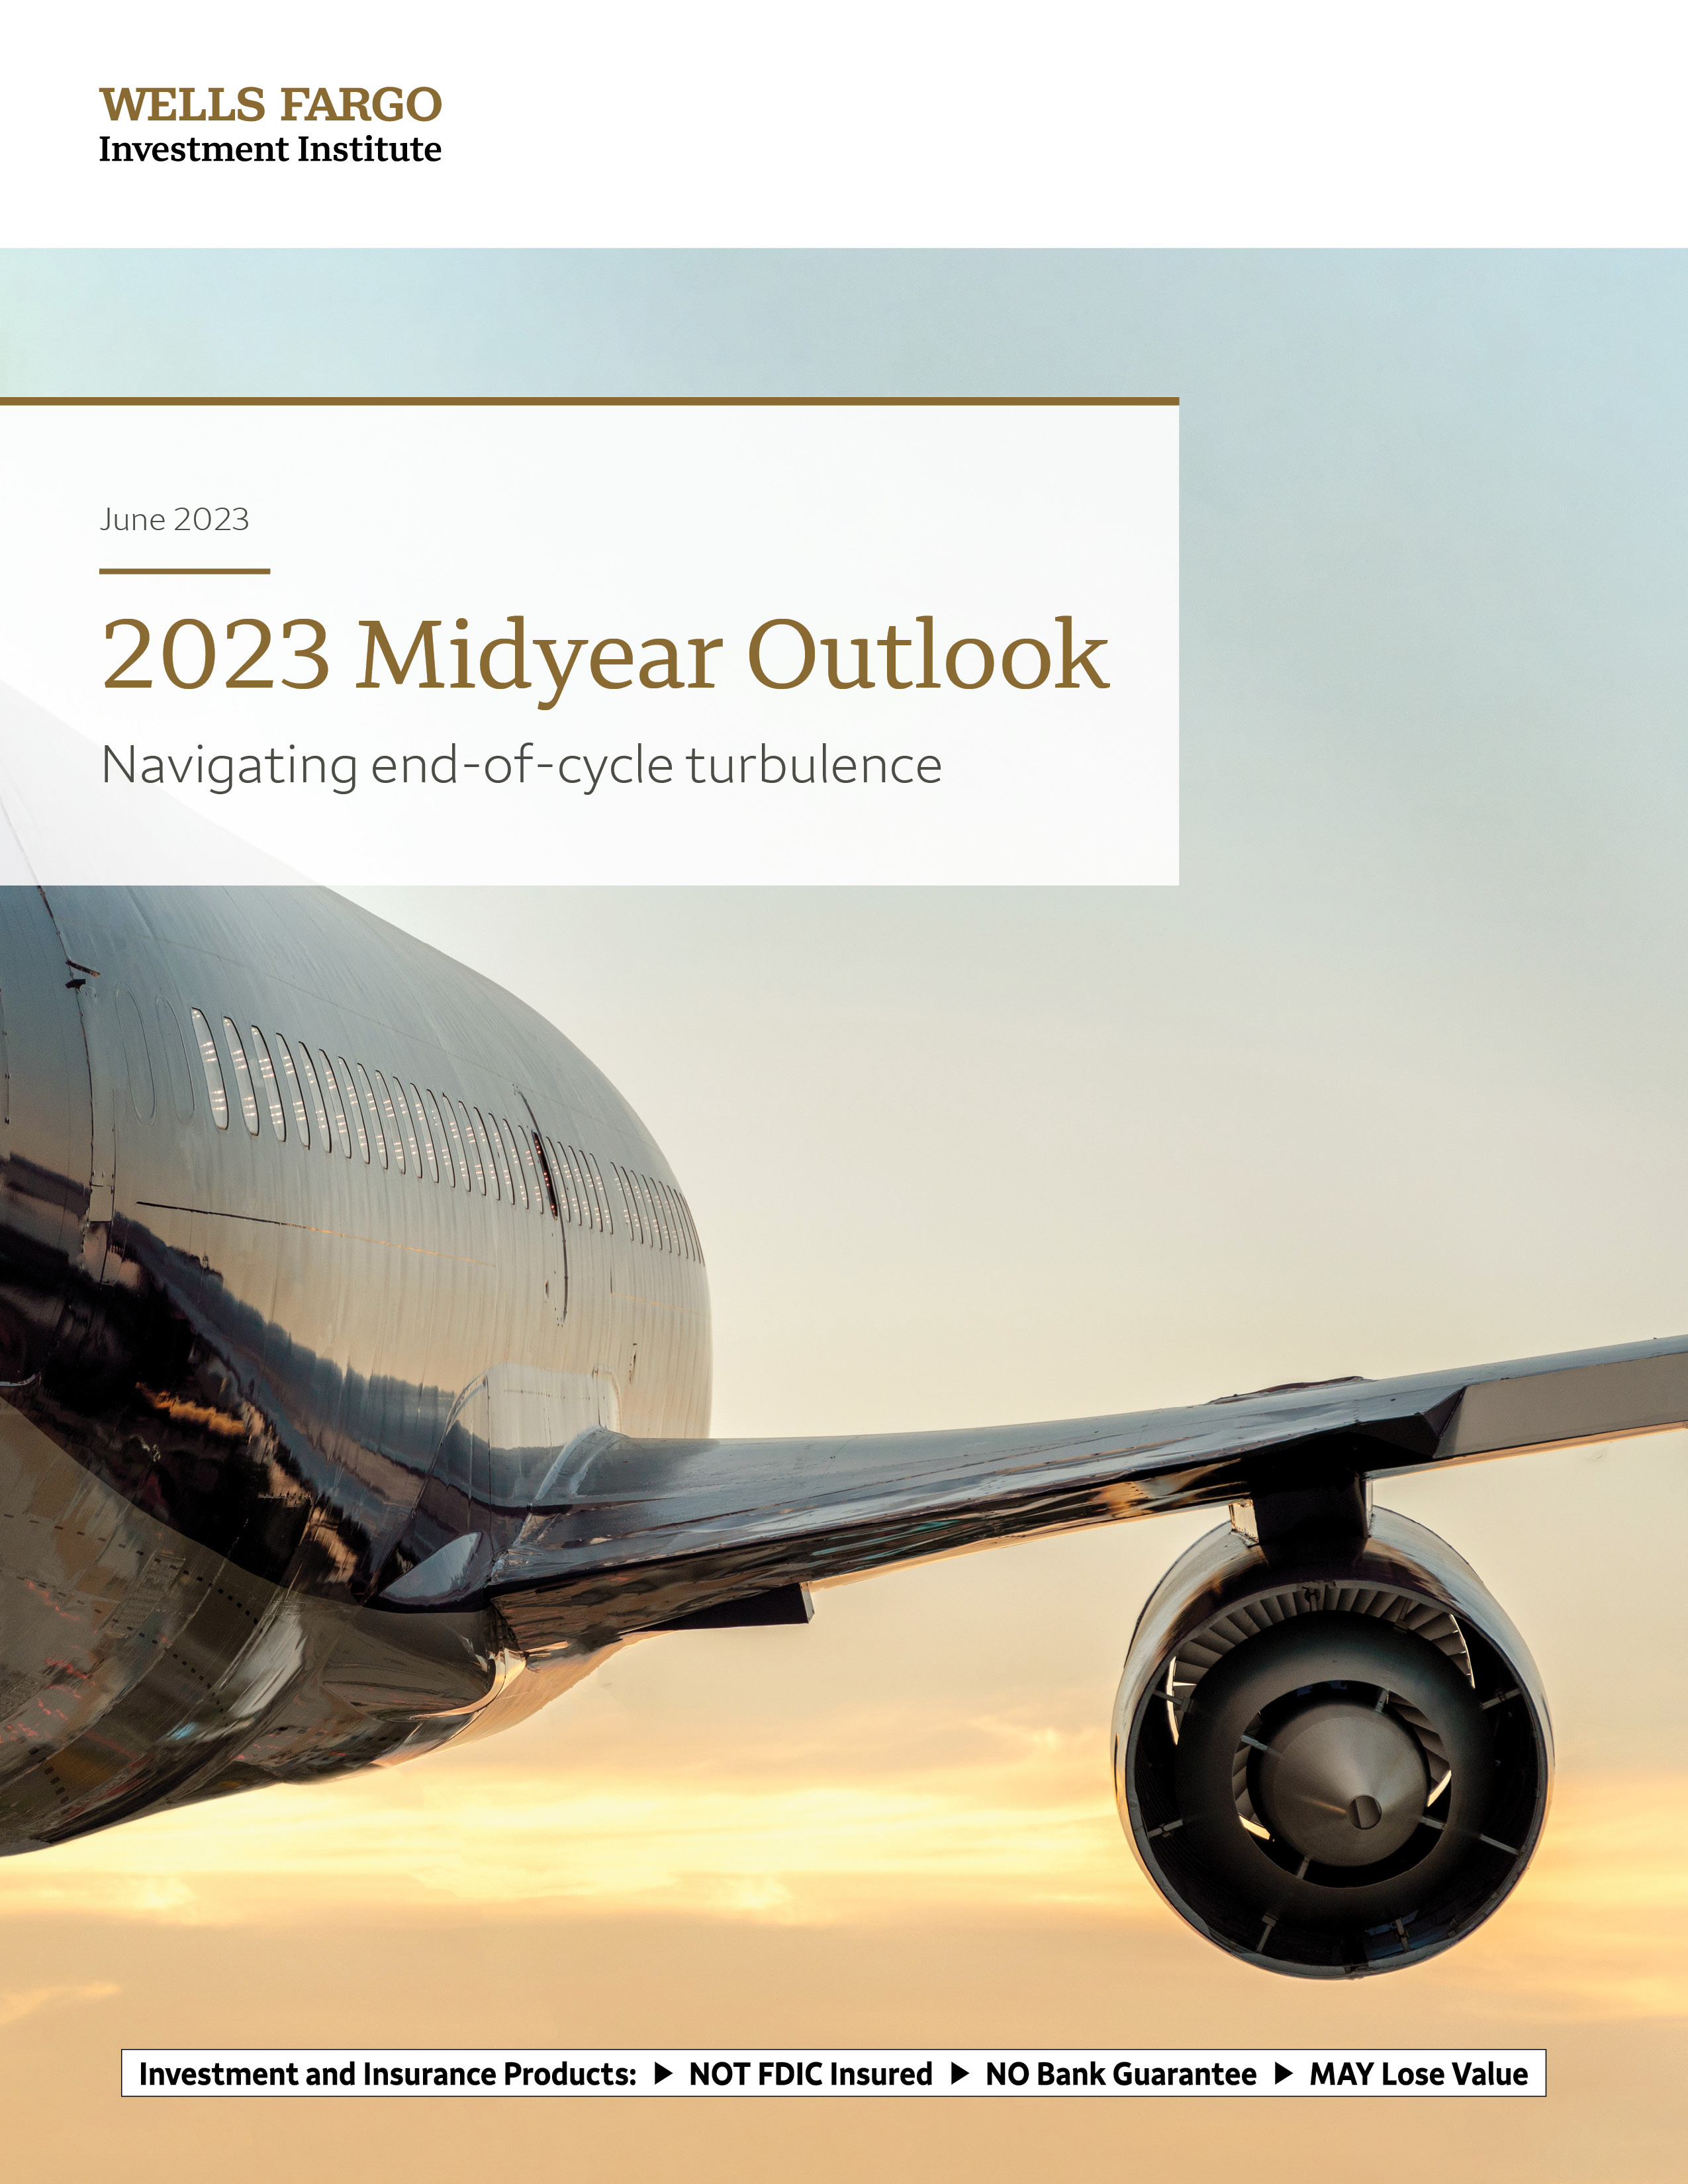 Cover of Wells Fargo Investment Institute 2023 Midyear Outlook.